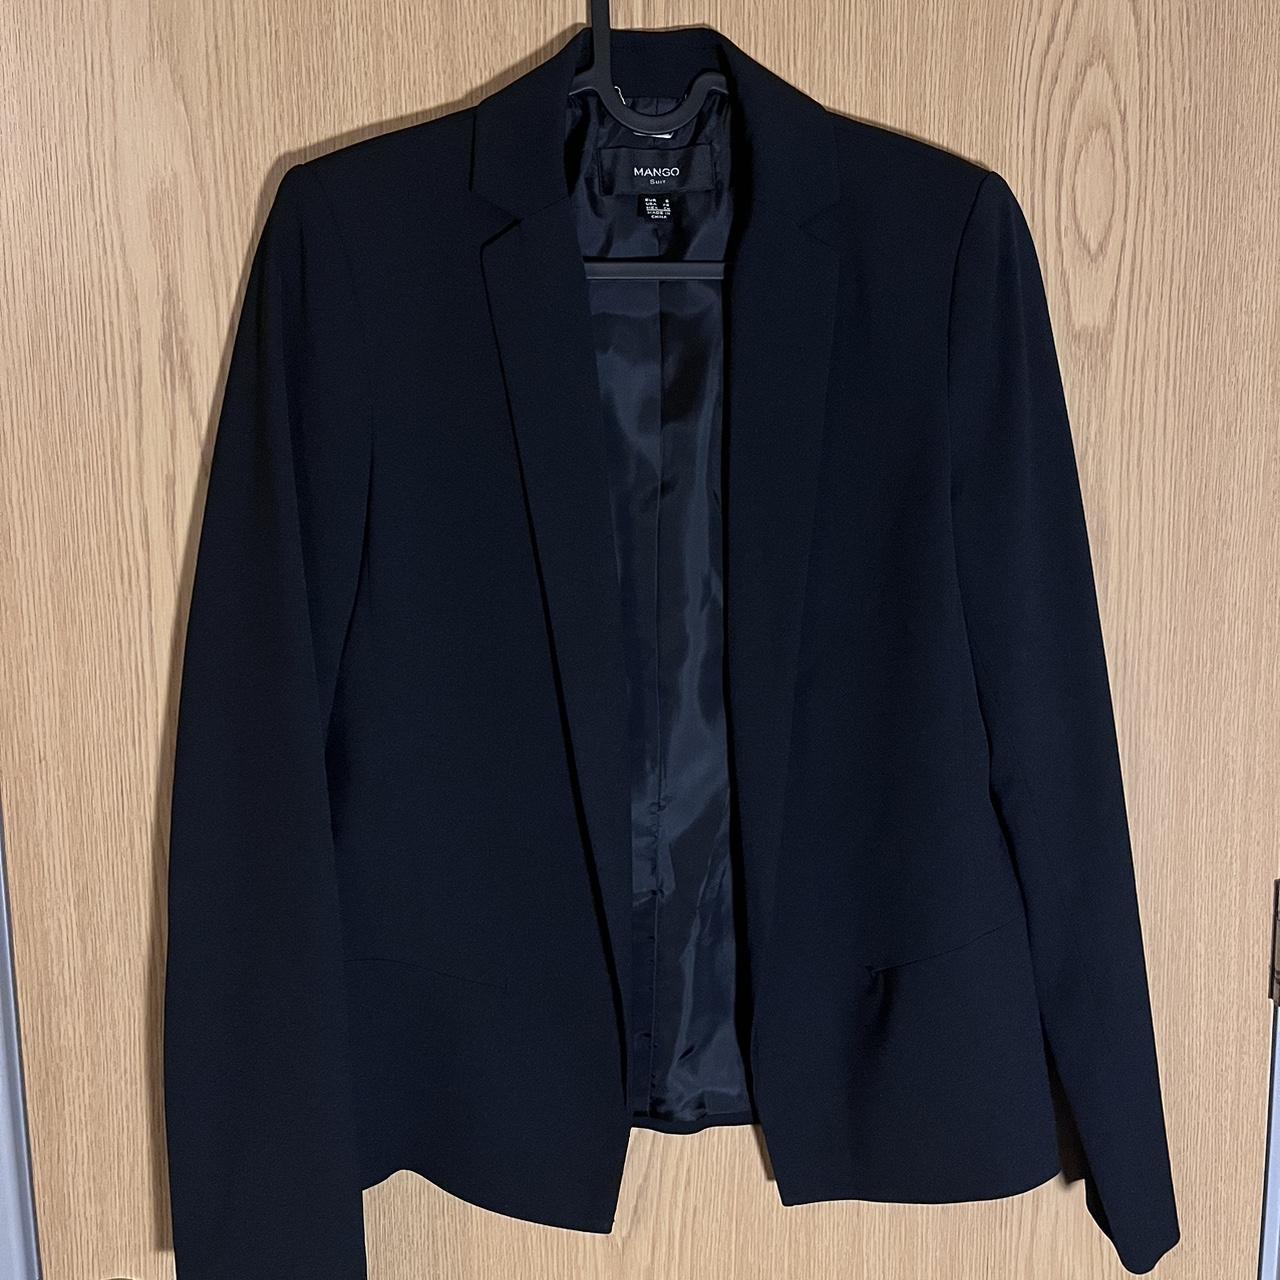 Black blazer from Mango in great condition. Fab for... - Depop